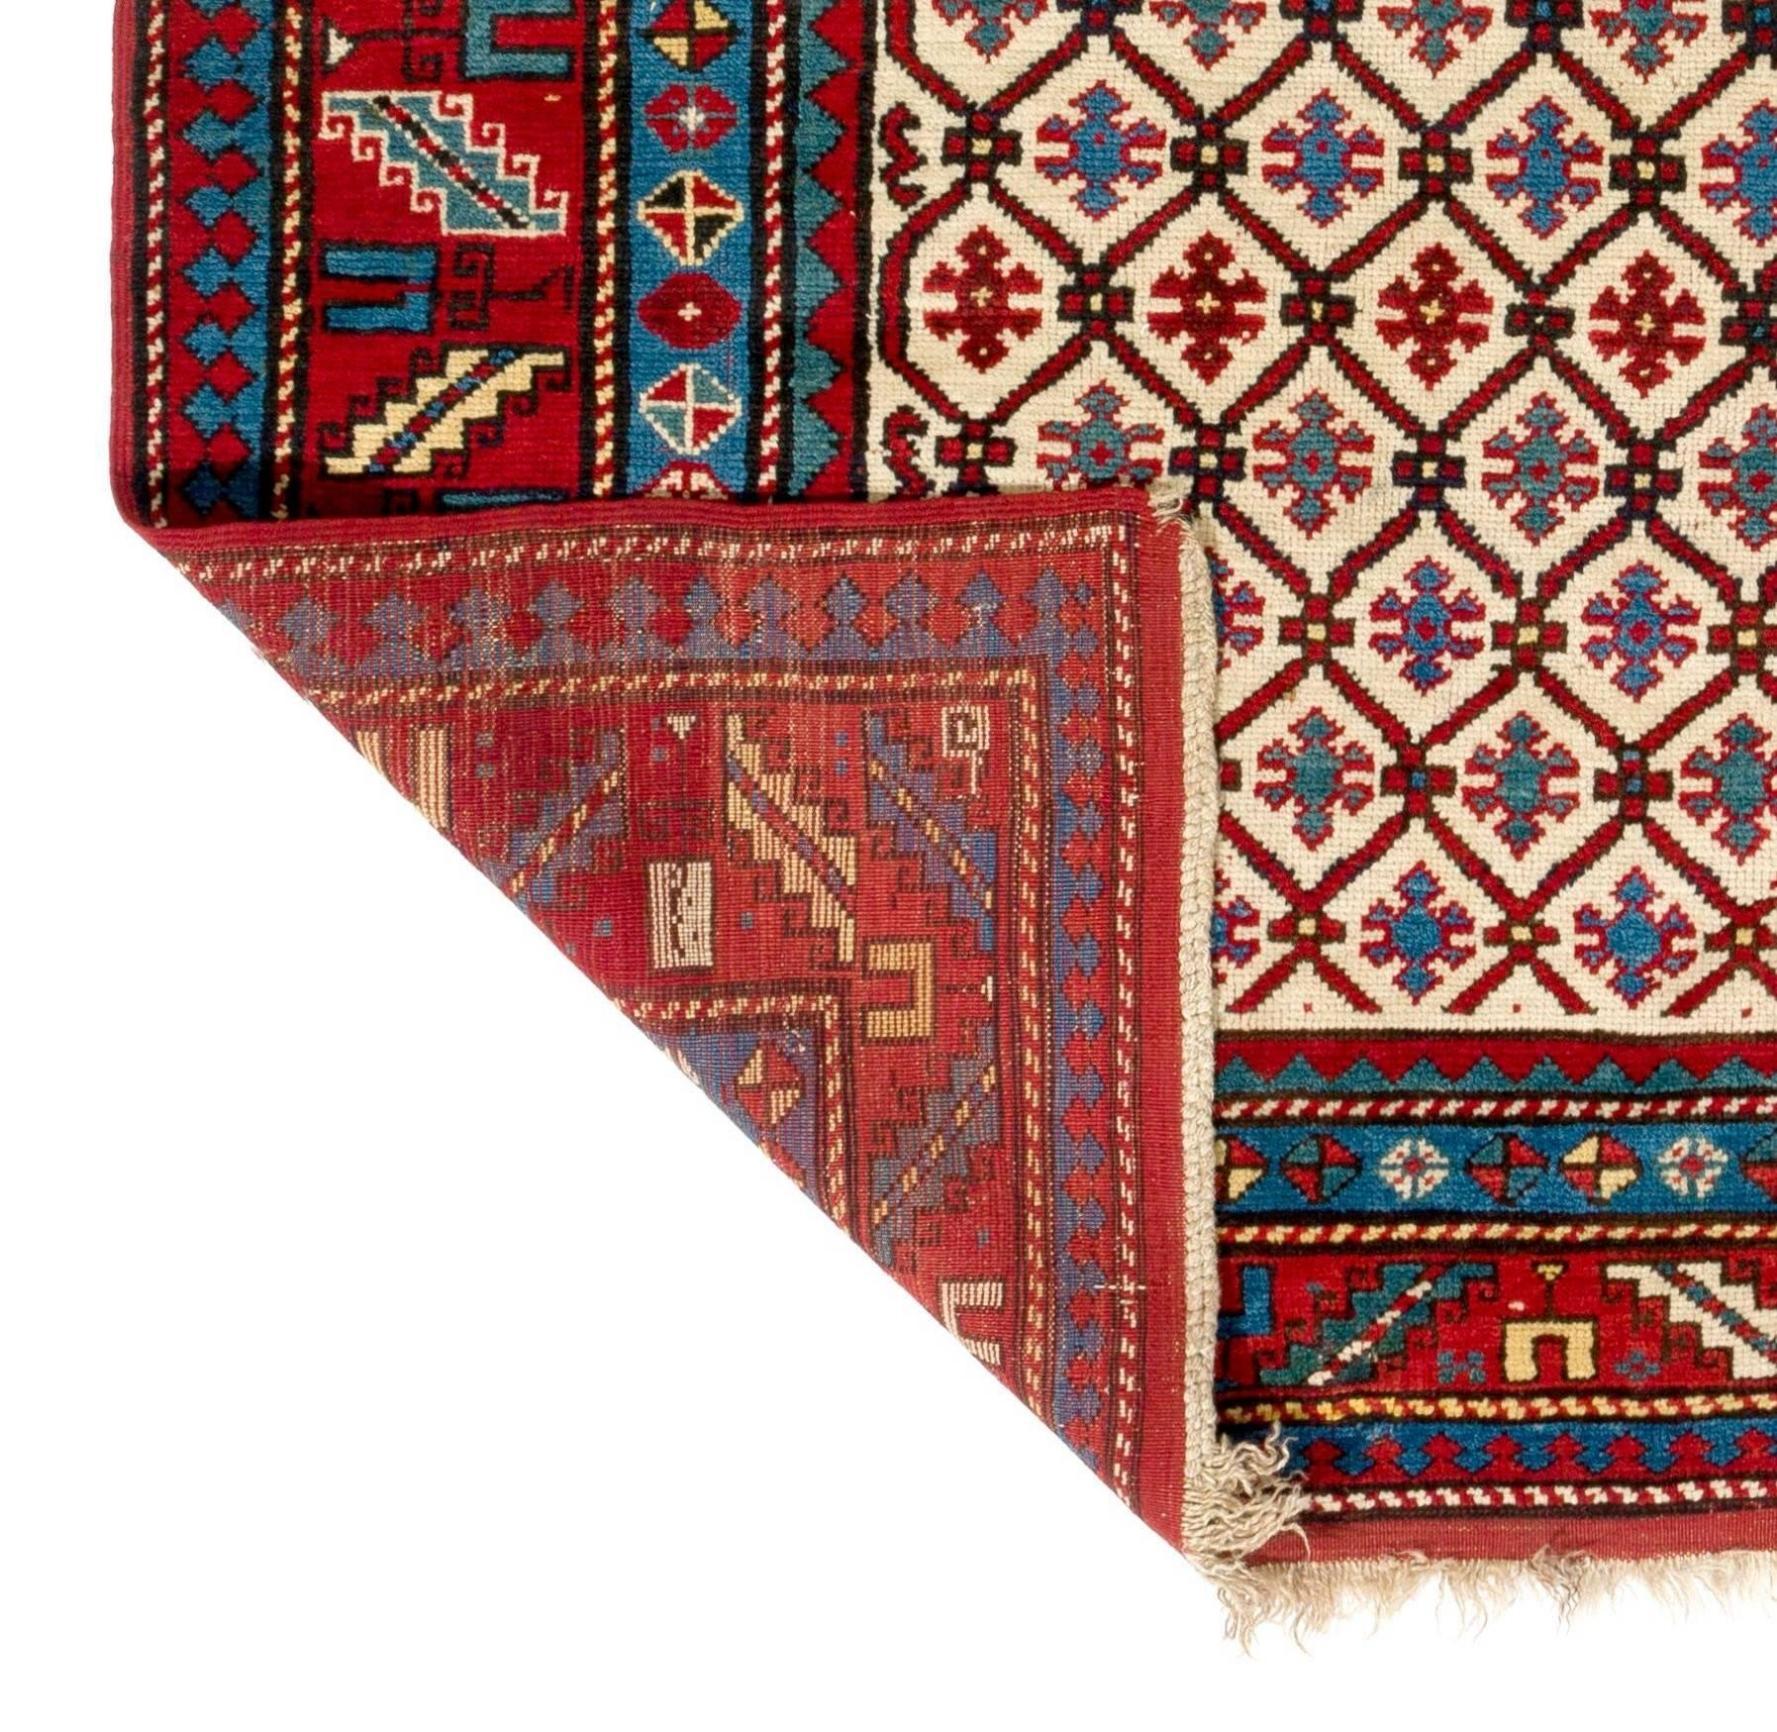 Antique Caucasian Kazak rug. Excellent condition, ful pile, all original
No repairs or issues.
100% wool and natural dyes
Provenance: A New York Collection. Measurs: 4'x7'